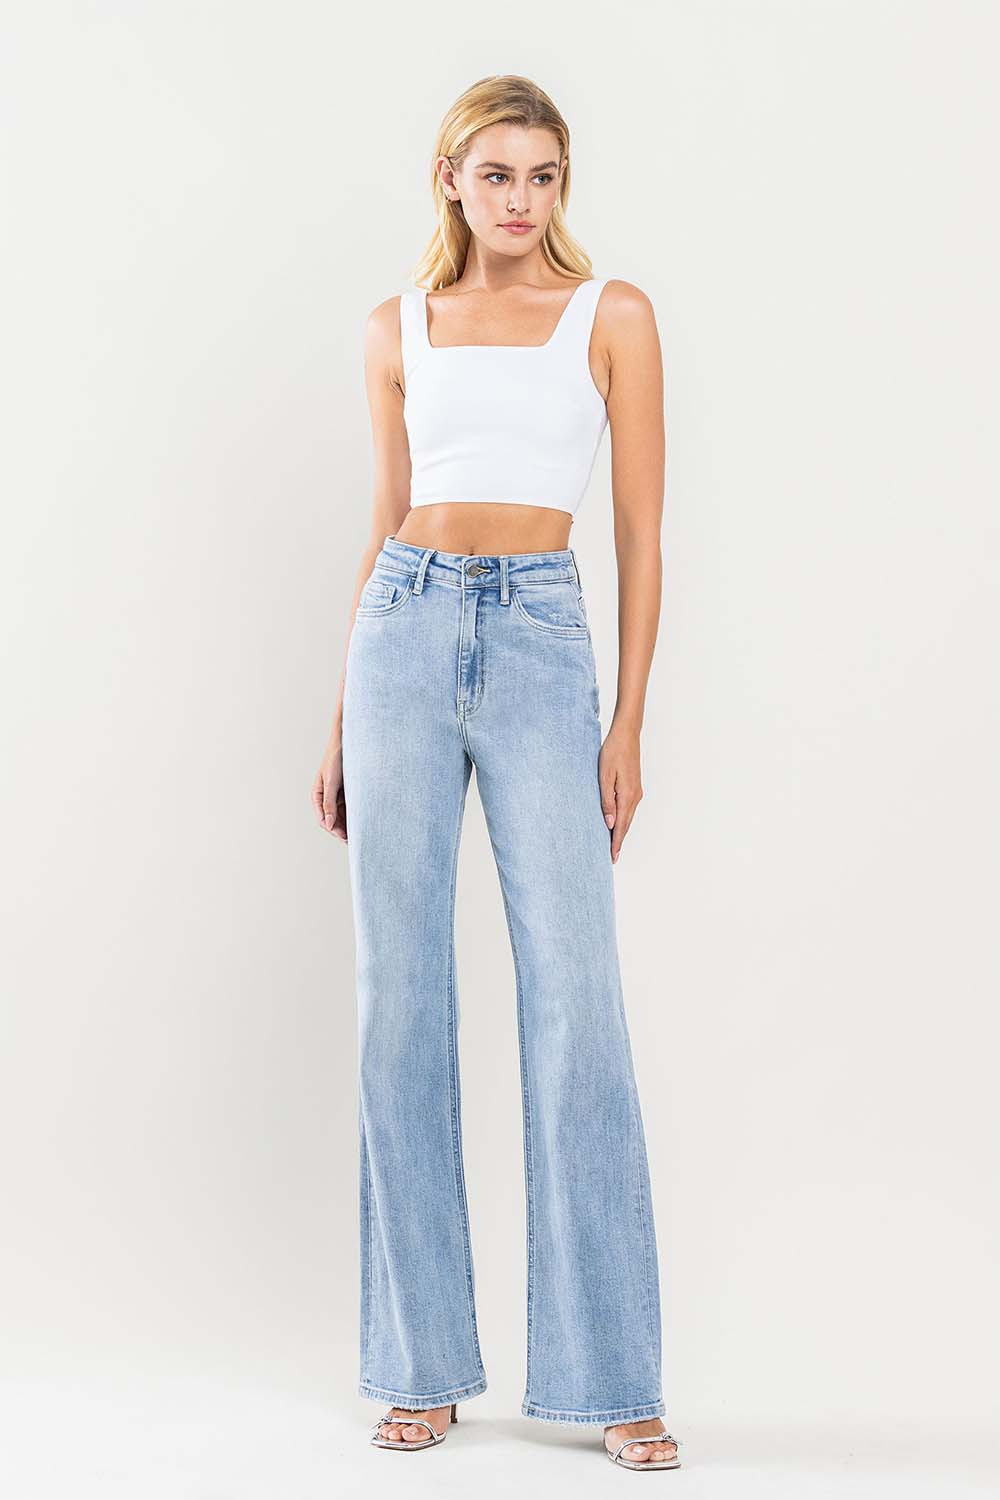 Flying Monkey | 90s Flare Jeans Light | Sweetest Stitch Boutique